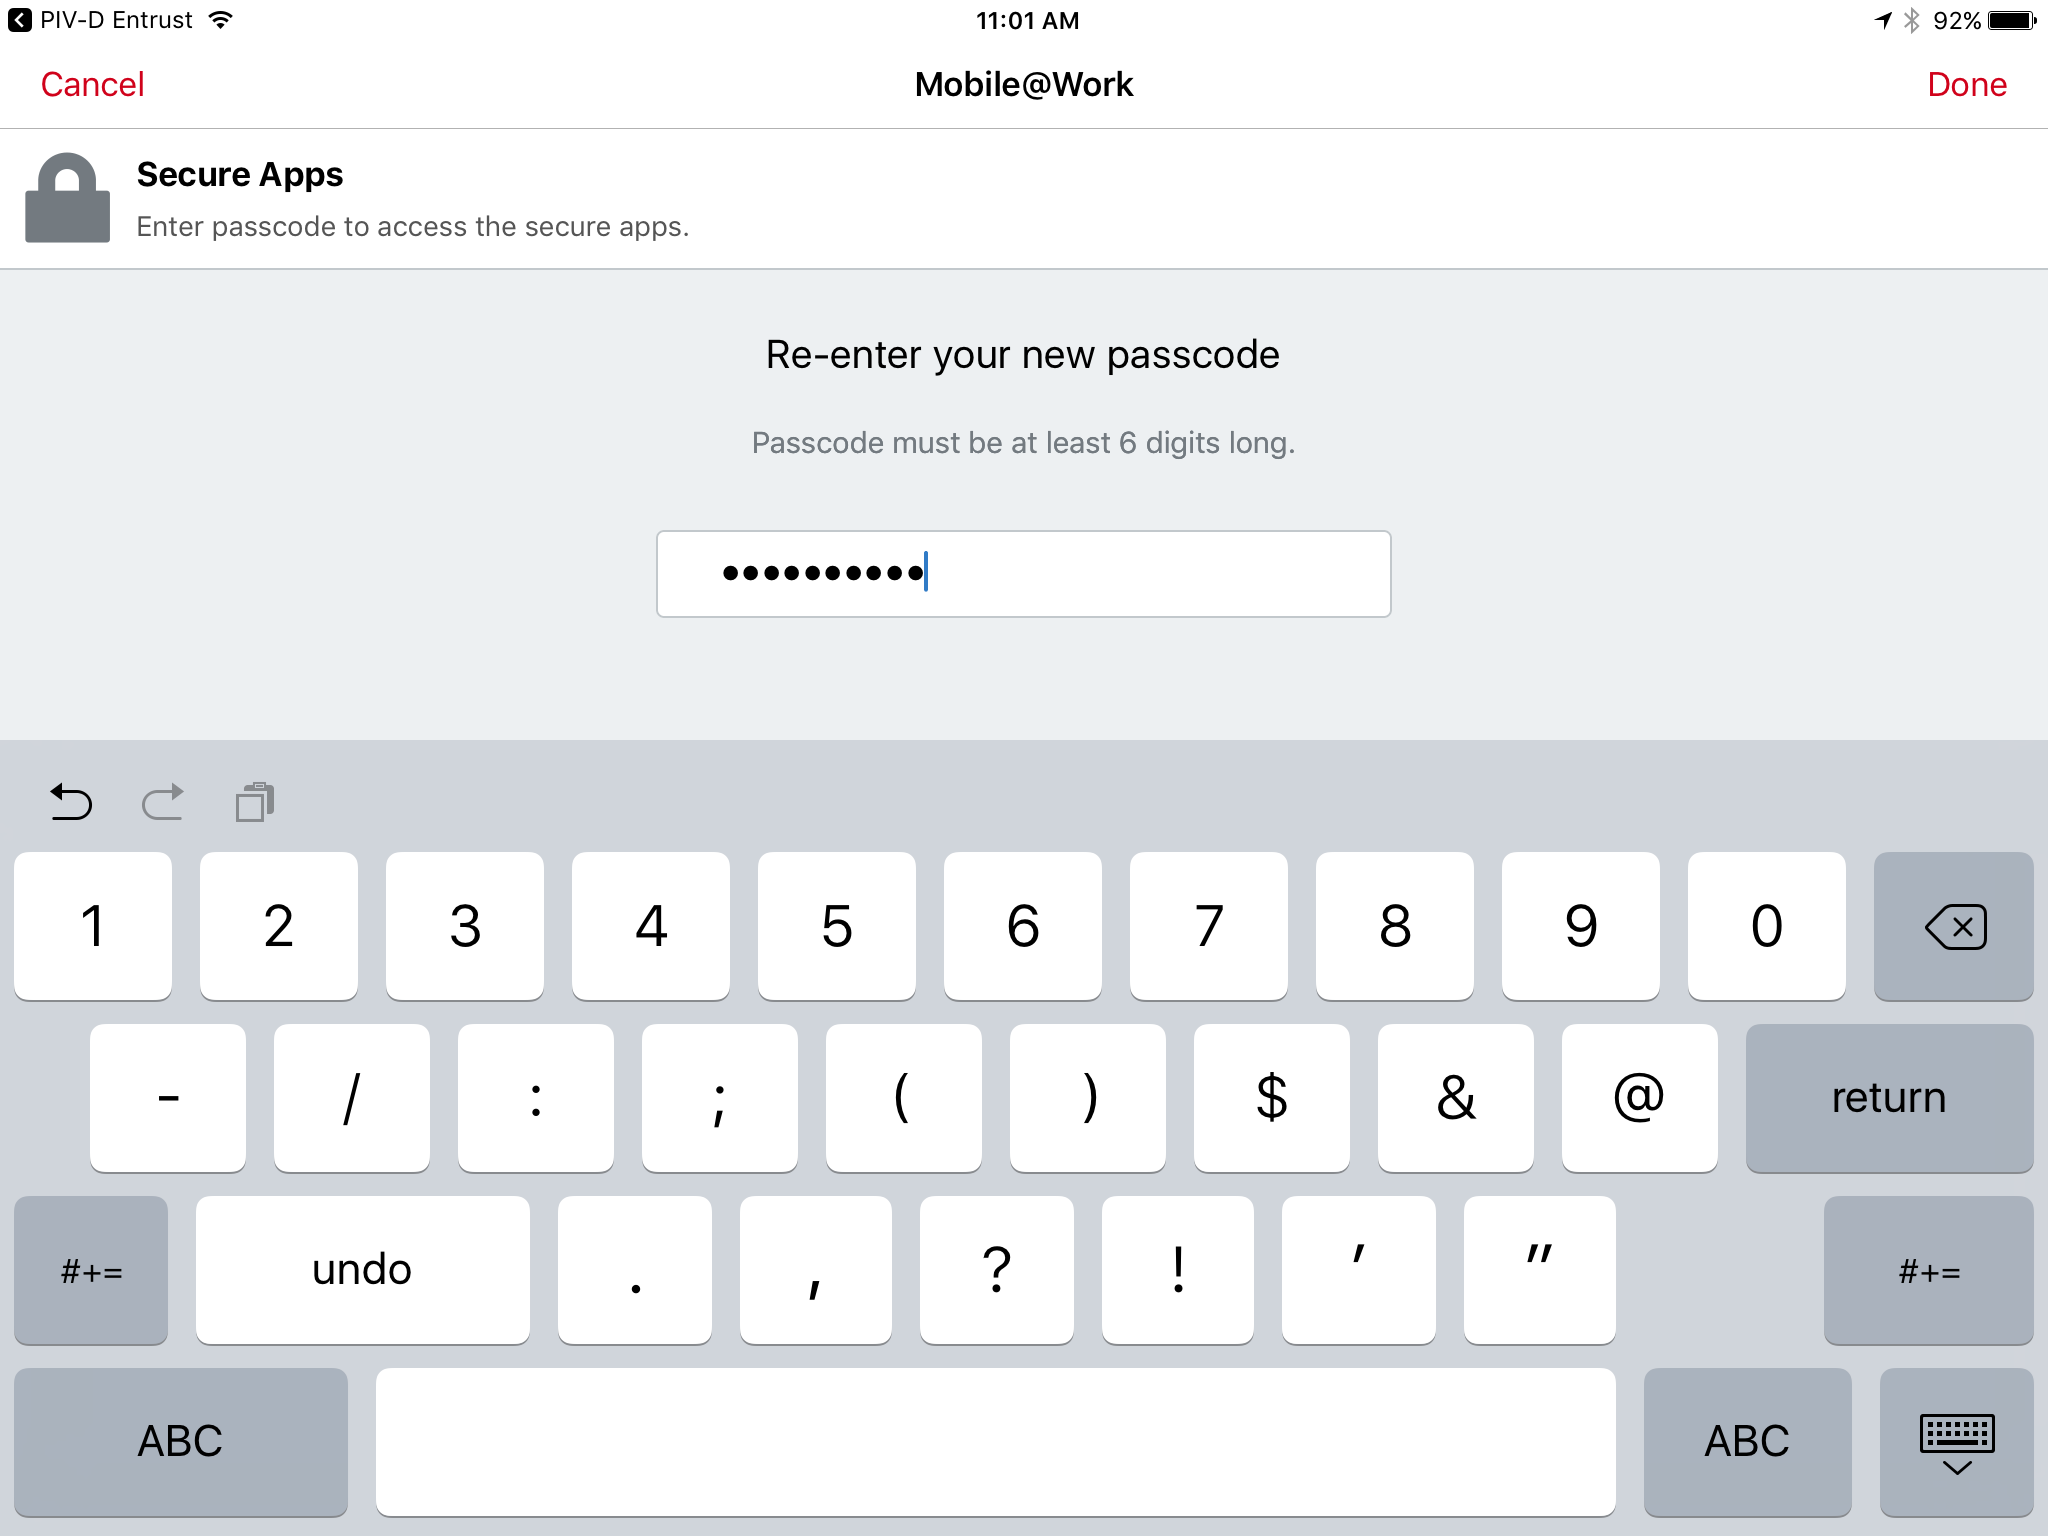 A screenshot of the Mobile@Work Secure Apps screen showing step b. above (re-entering your new passcode).